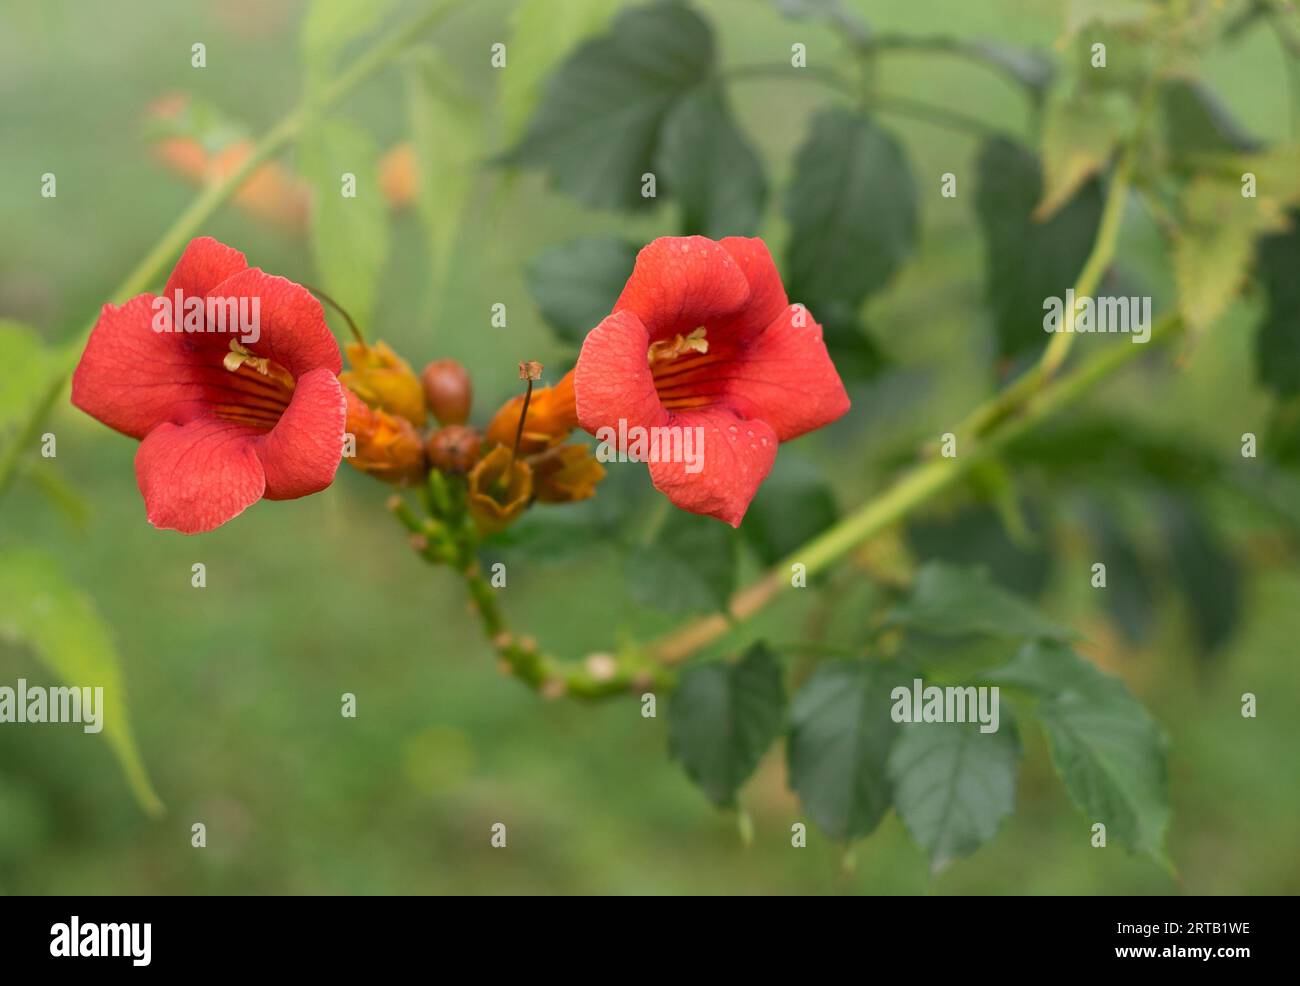 Red blossom of trumpet vine, trumpet creeper or campsis radicans on a sunny summer day on the blurred green nature background Stock Photo